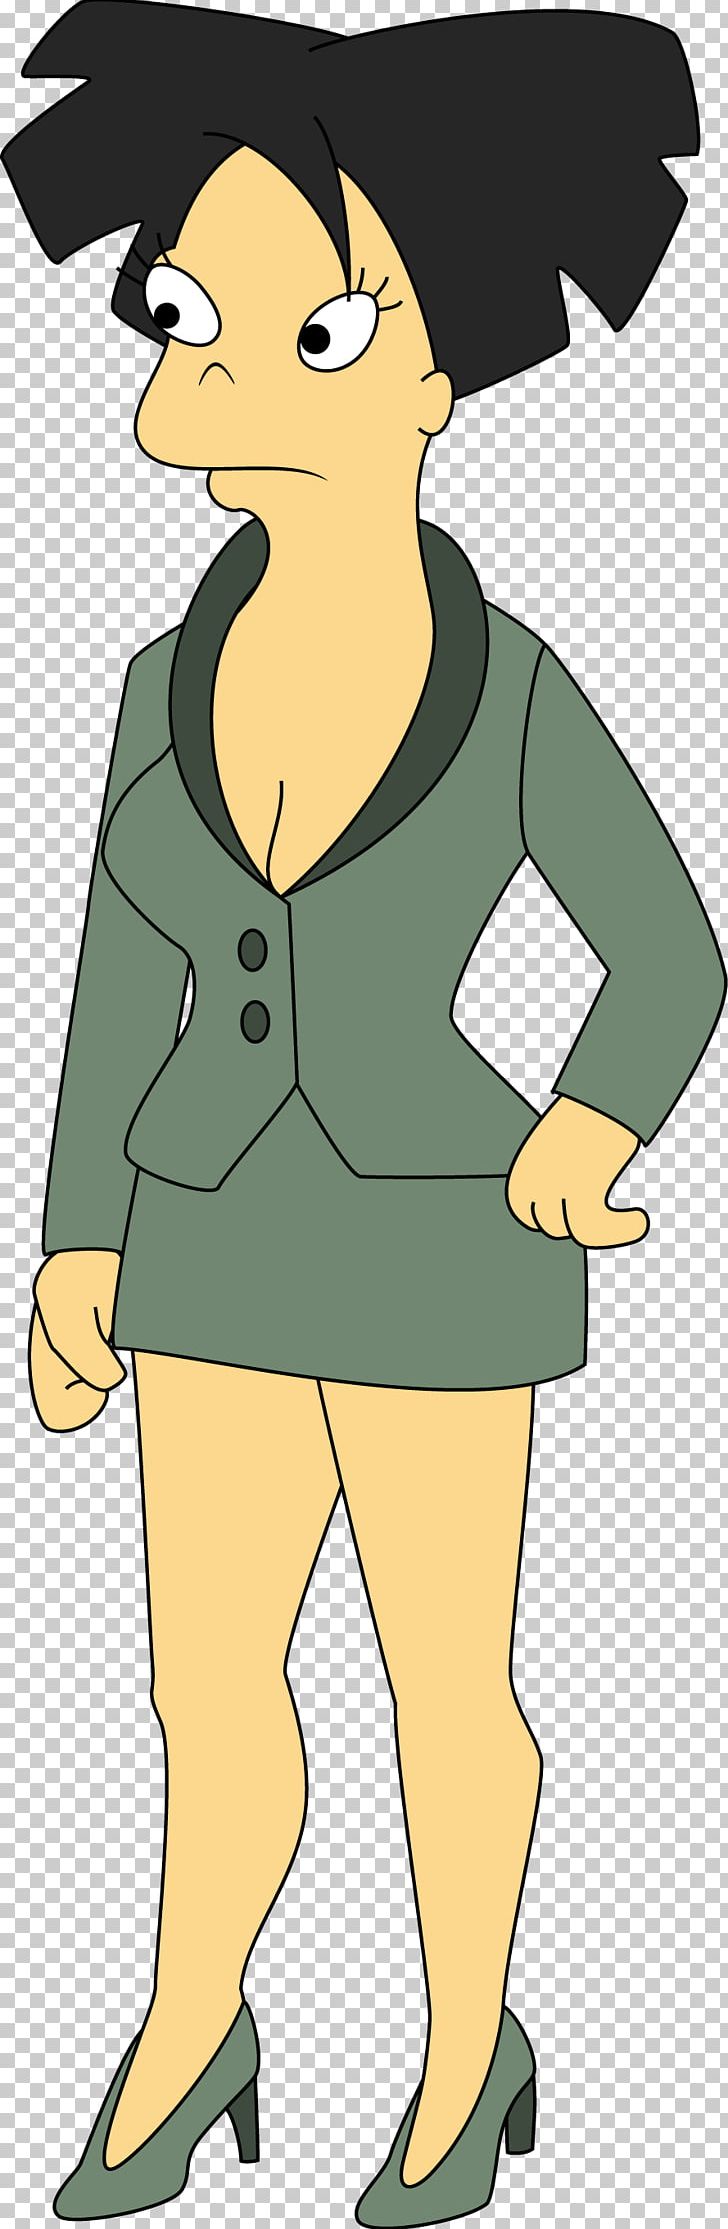 Amy Wong Philip J. Fry Leela Bender Zoidberg PNG, Clipart, Amy, Amy Wong, Art, Artistic, Artwork Free PNG Download